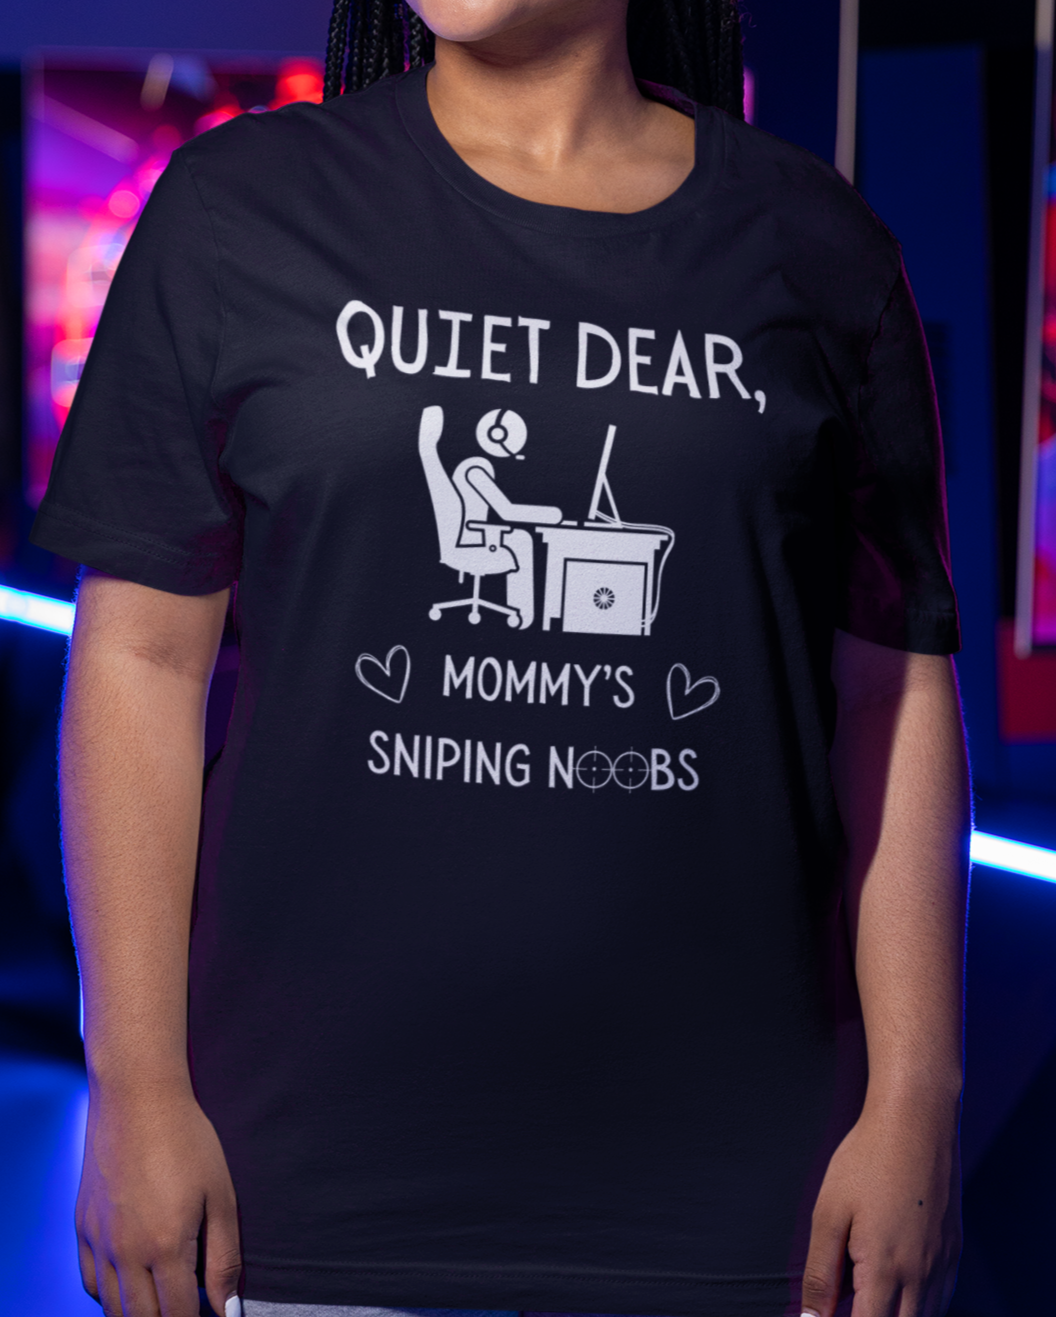 A model wearing a black t-shirt that reads Quiet Dear, Mommy's Sniping Noobs in white text. The lower text is framed by two hearts, and the O's are in the shape of sniper scopes. In the center of the shirt is an image of a person at a desk with a gaming PC.